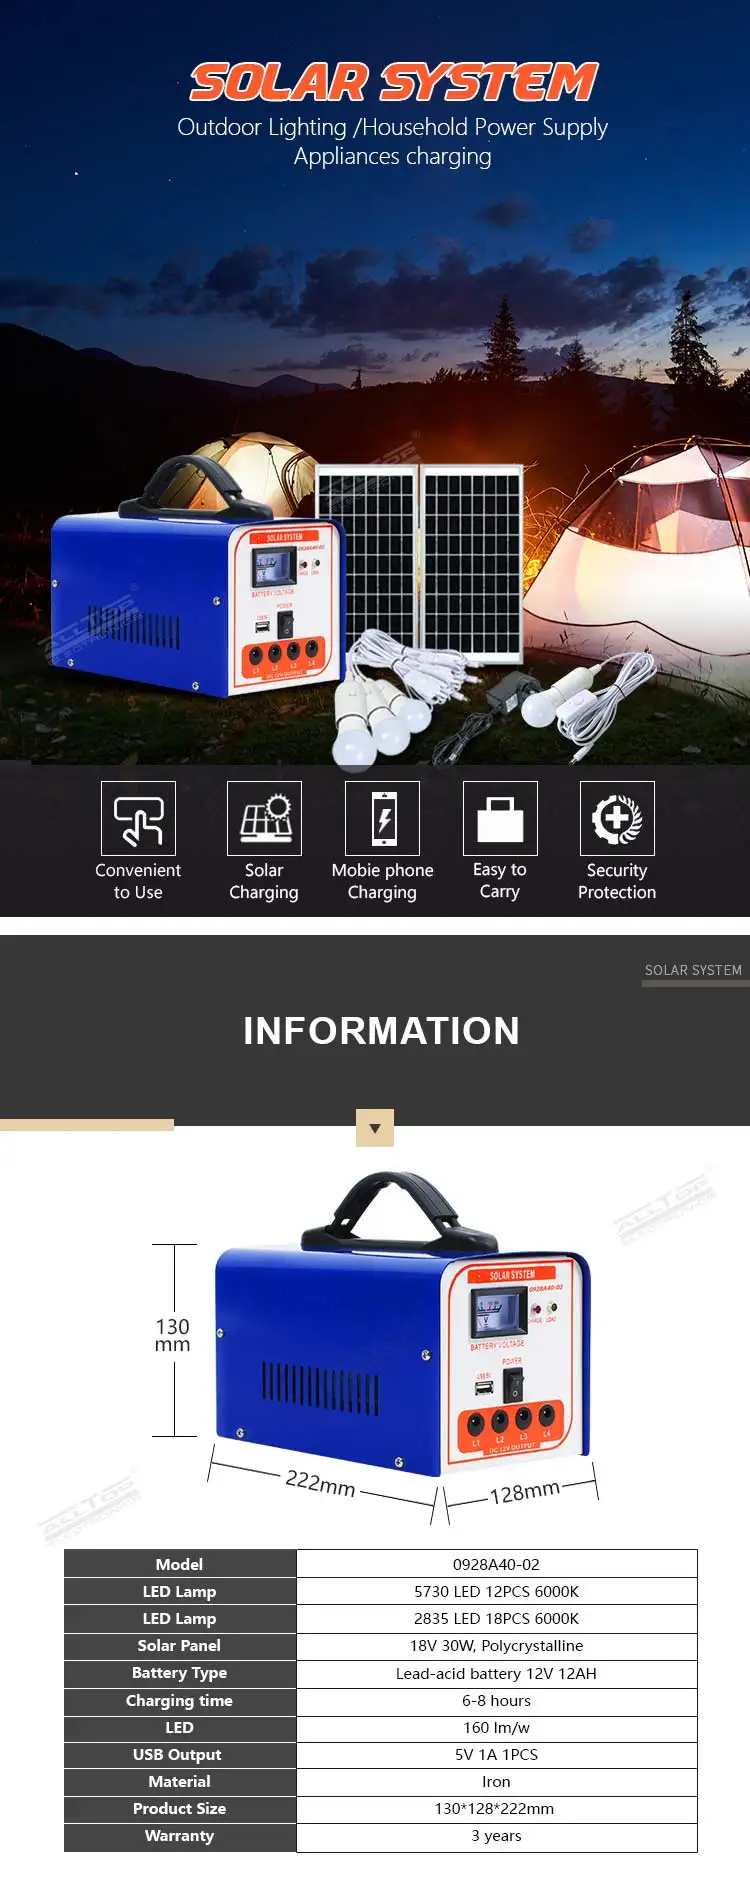 Portable Off-grid Mini home solar light kits DC/AC 40w solar panel power system with USB charger